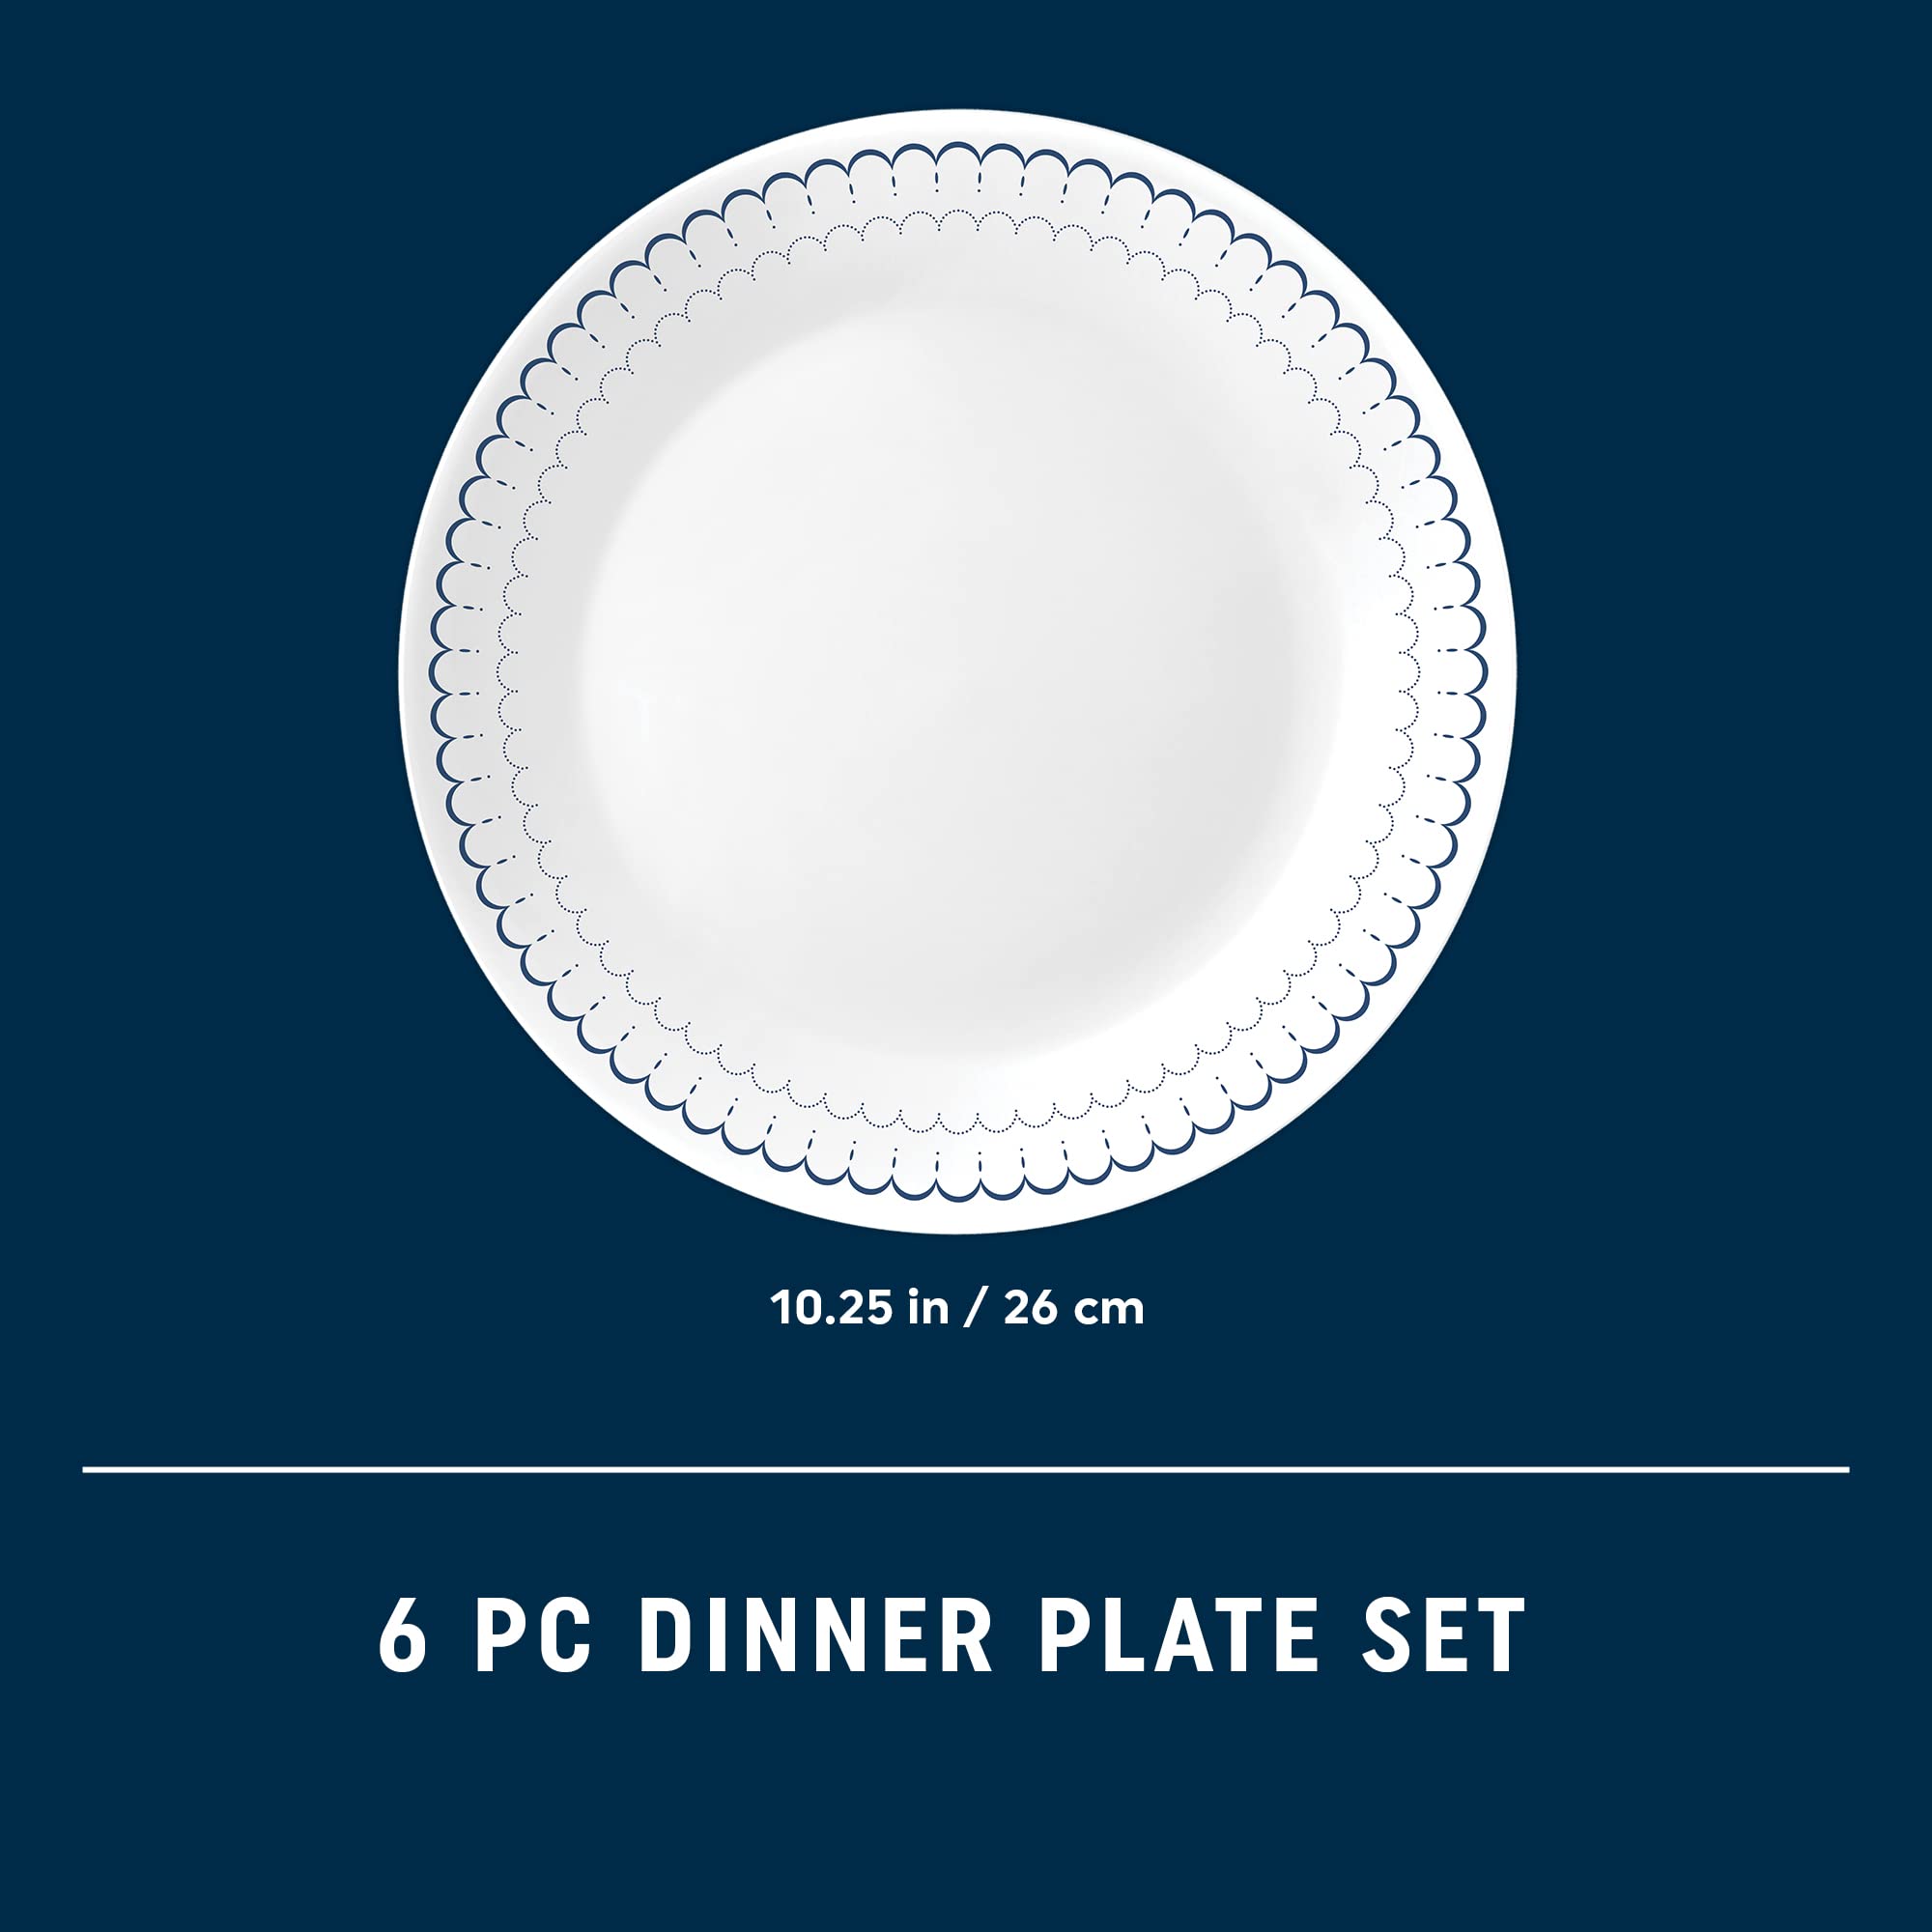 Corelle 6-Piece 10.25" Dinner Round Plates, Vitrelle Triple Layer Glass, Lightweight Round Plates, Large Round Plates, Chip and Scratch Resistant, Microwave and Dishwasher Safe, Caspian